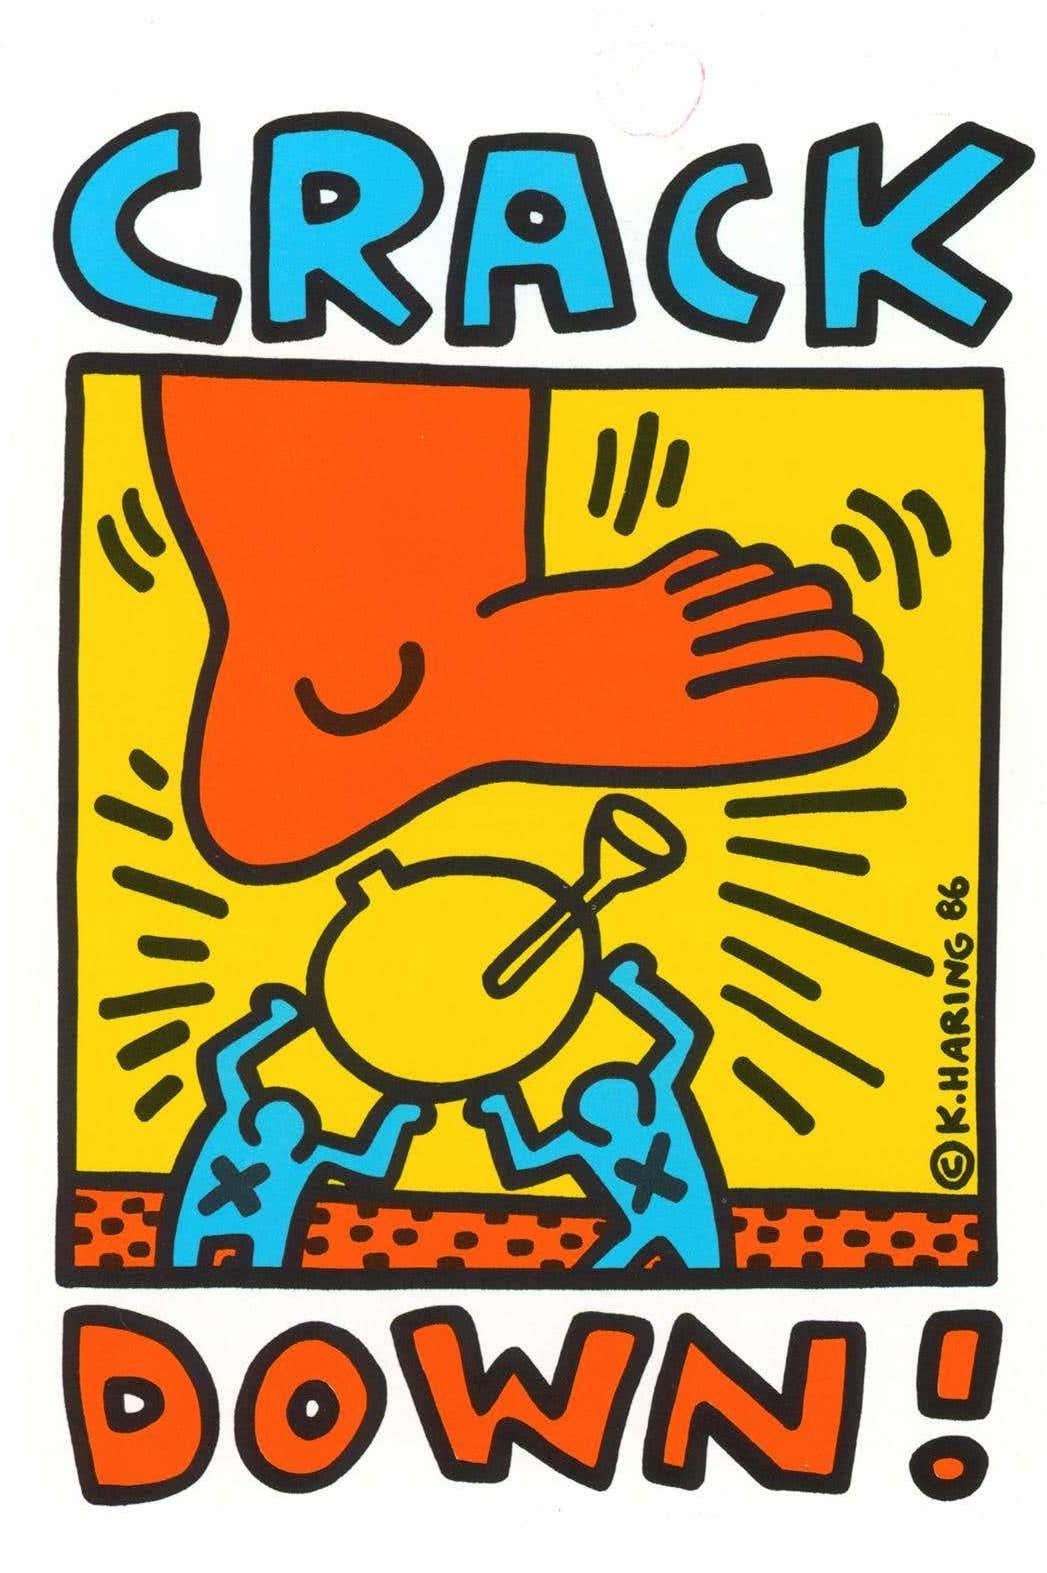 Keith Haring crack down! 1986: Vintage original 1986 Keith Haring illustrated Crack Down! benefit  program.  

This folding pamphlet was designed & illustrated by Keith Haring (along with a poster of same), for the 1986 